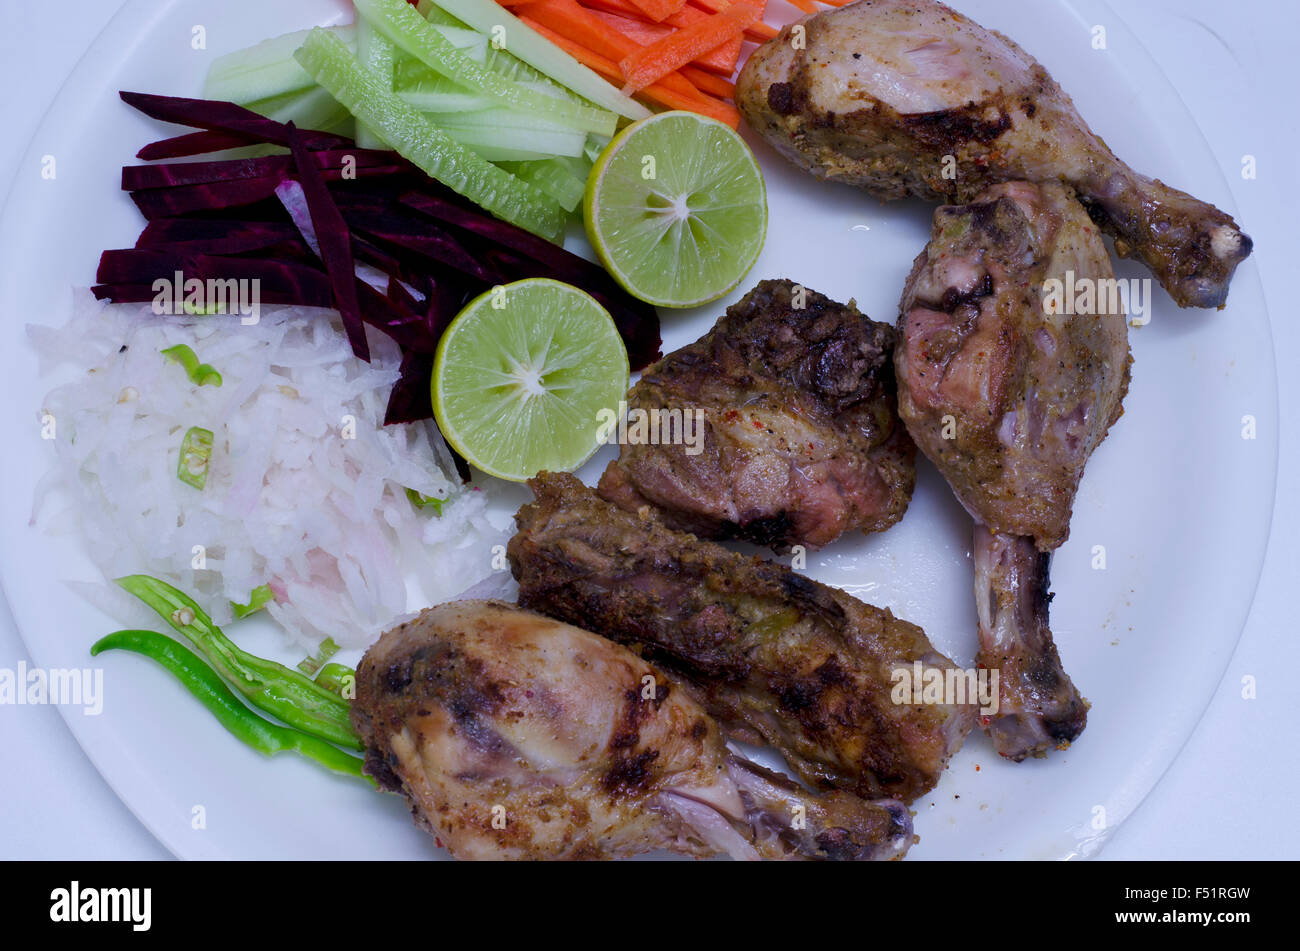 Roasted chicken with fresh salad served in a plate in Chennai, Tamil Nadu, India, Asia Stock Photo